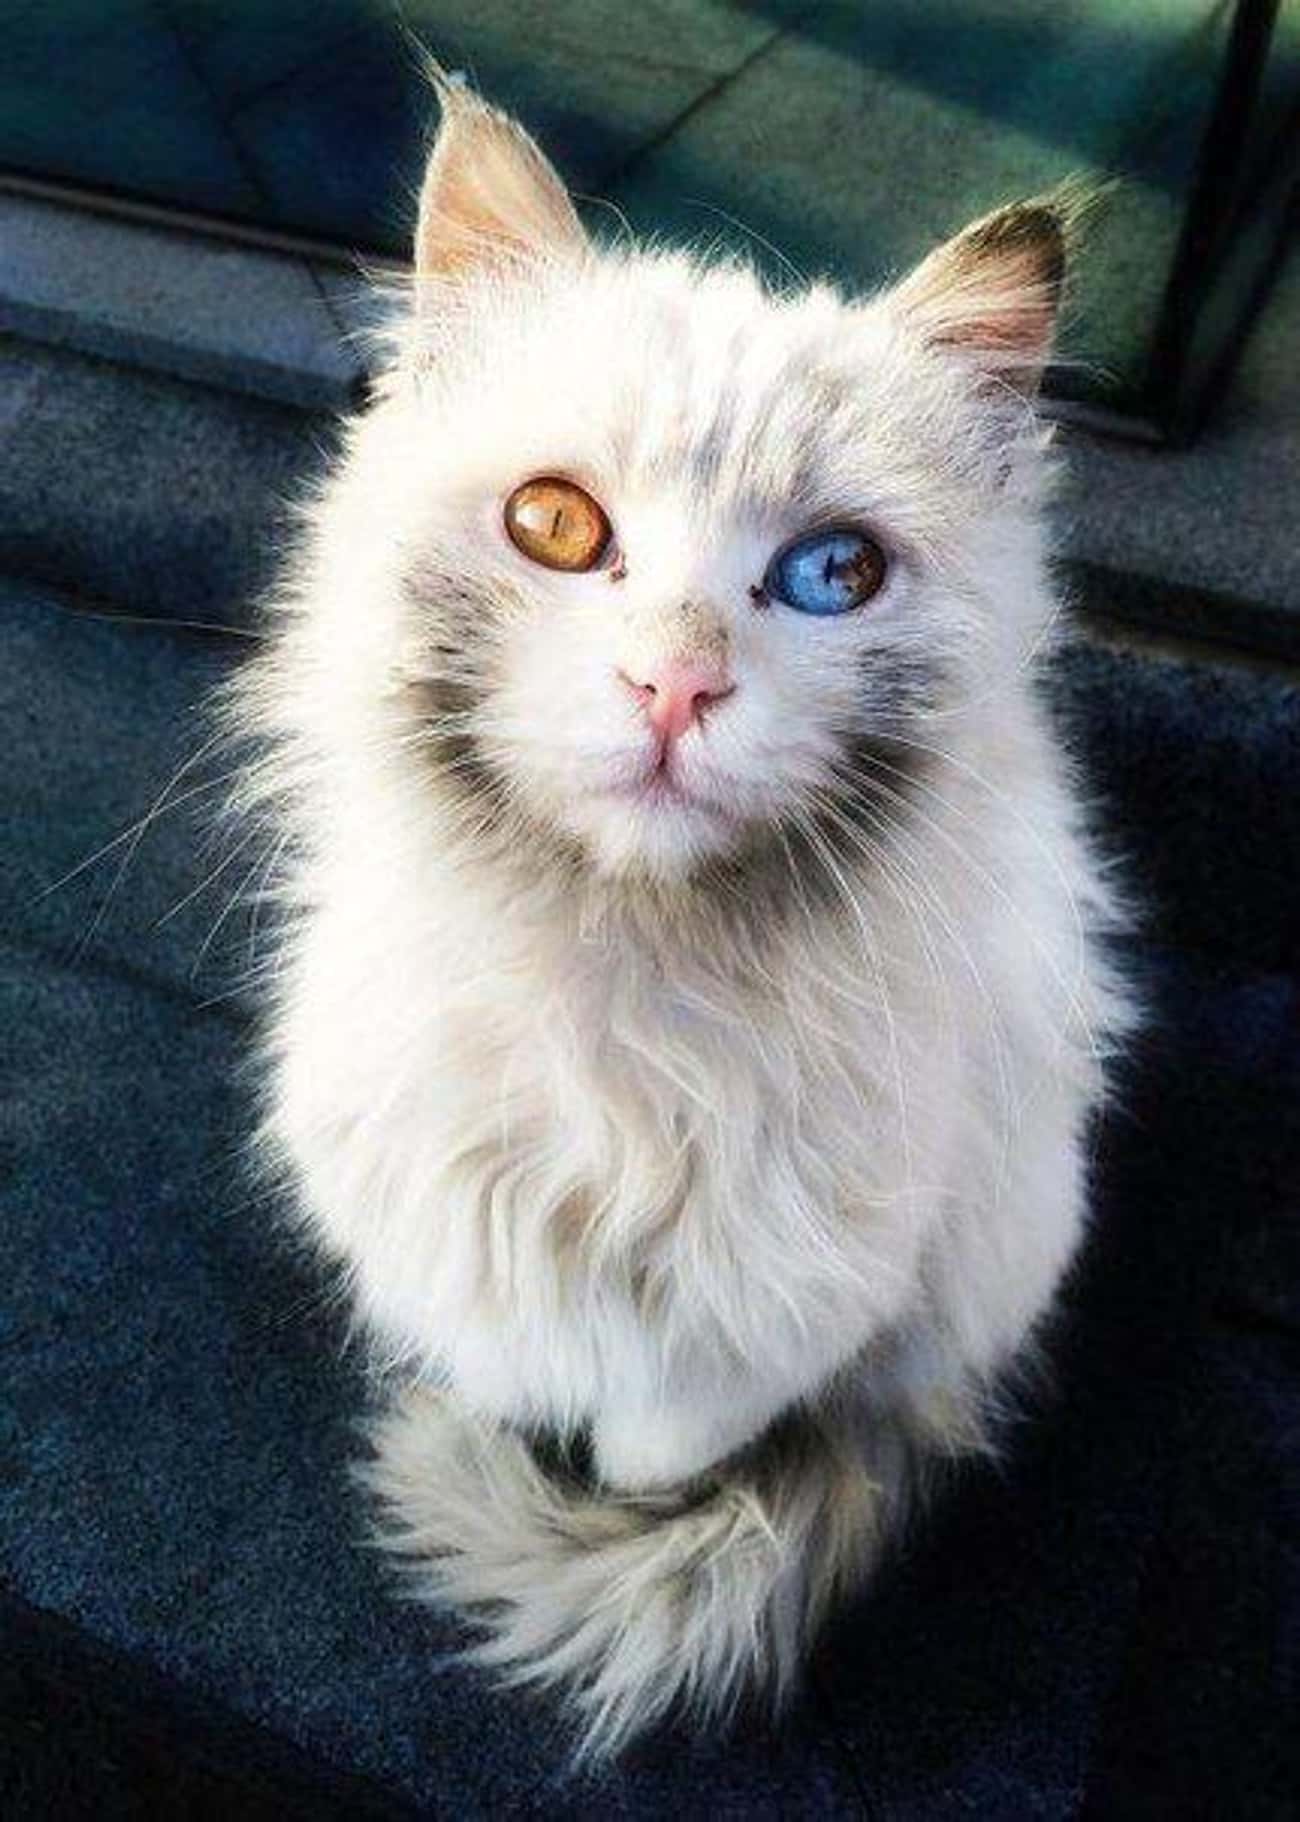 This Cat Has Eyes Like Marbles